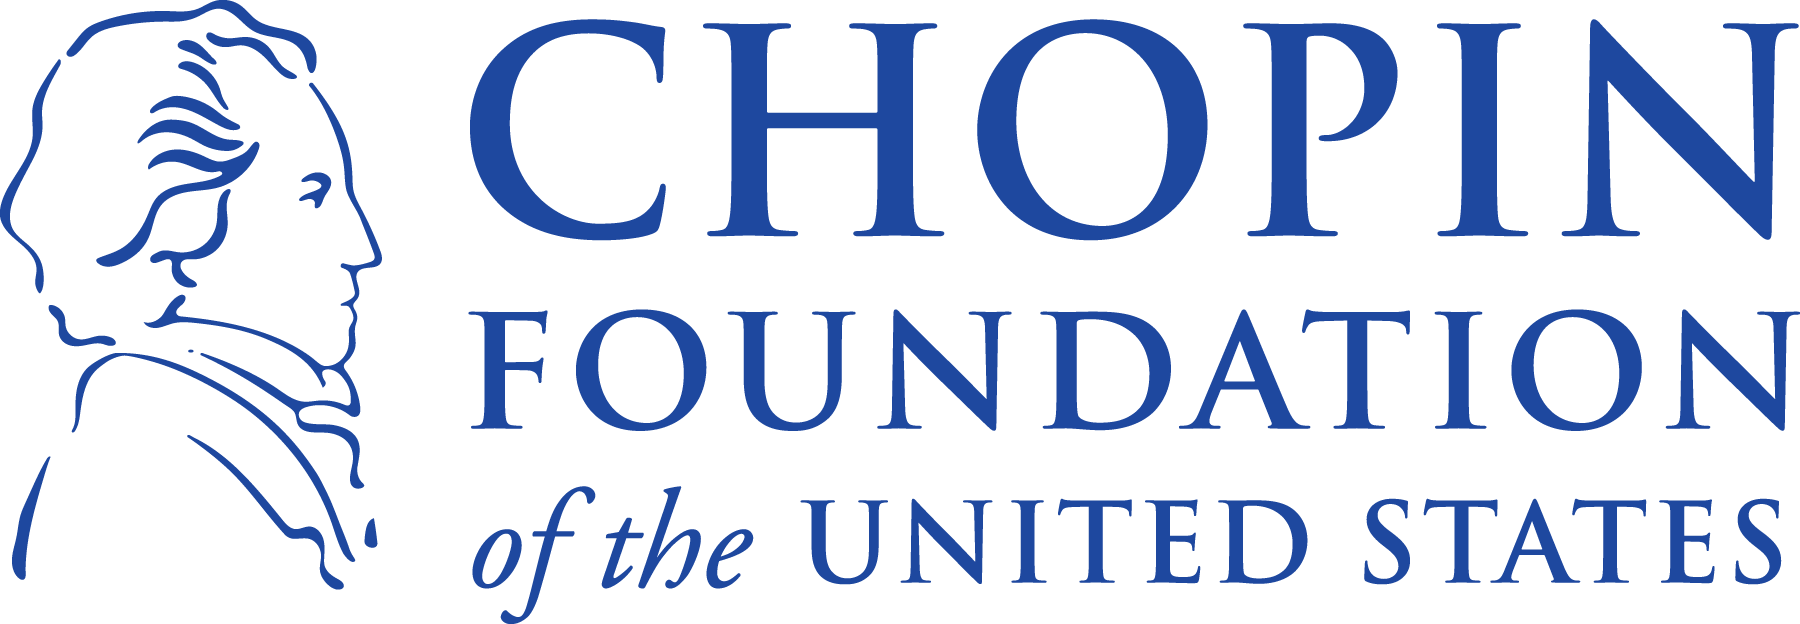 Logo for the Chopin Foundation of the United States